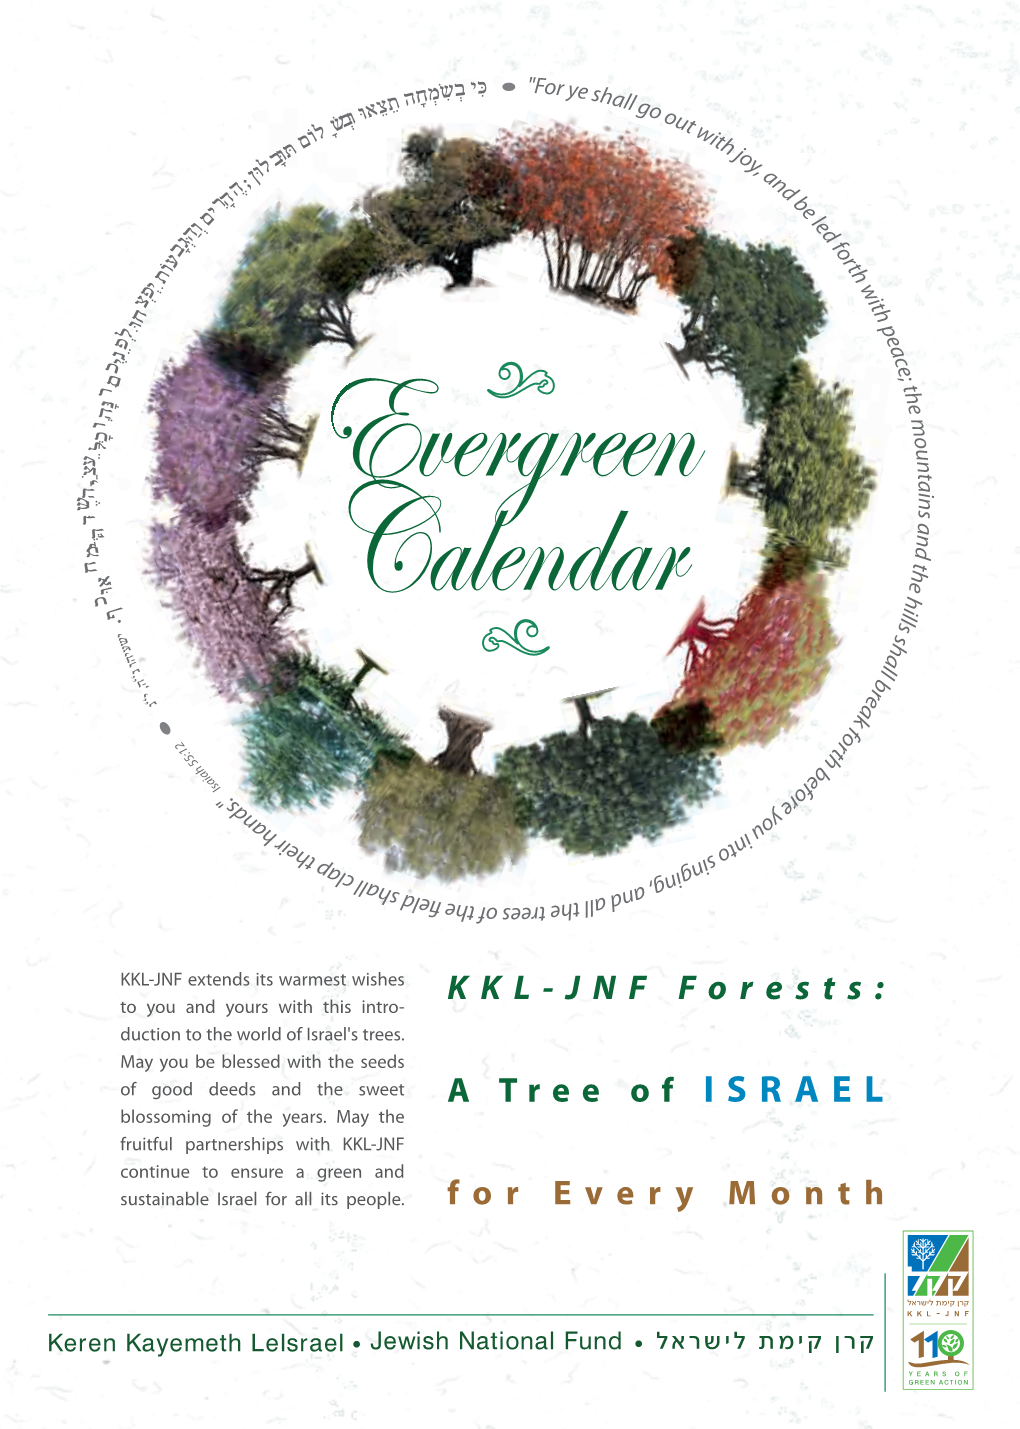 Evergreen Calendar KKL-JNF Forests: a Tree of Israel for Every